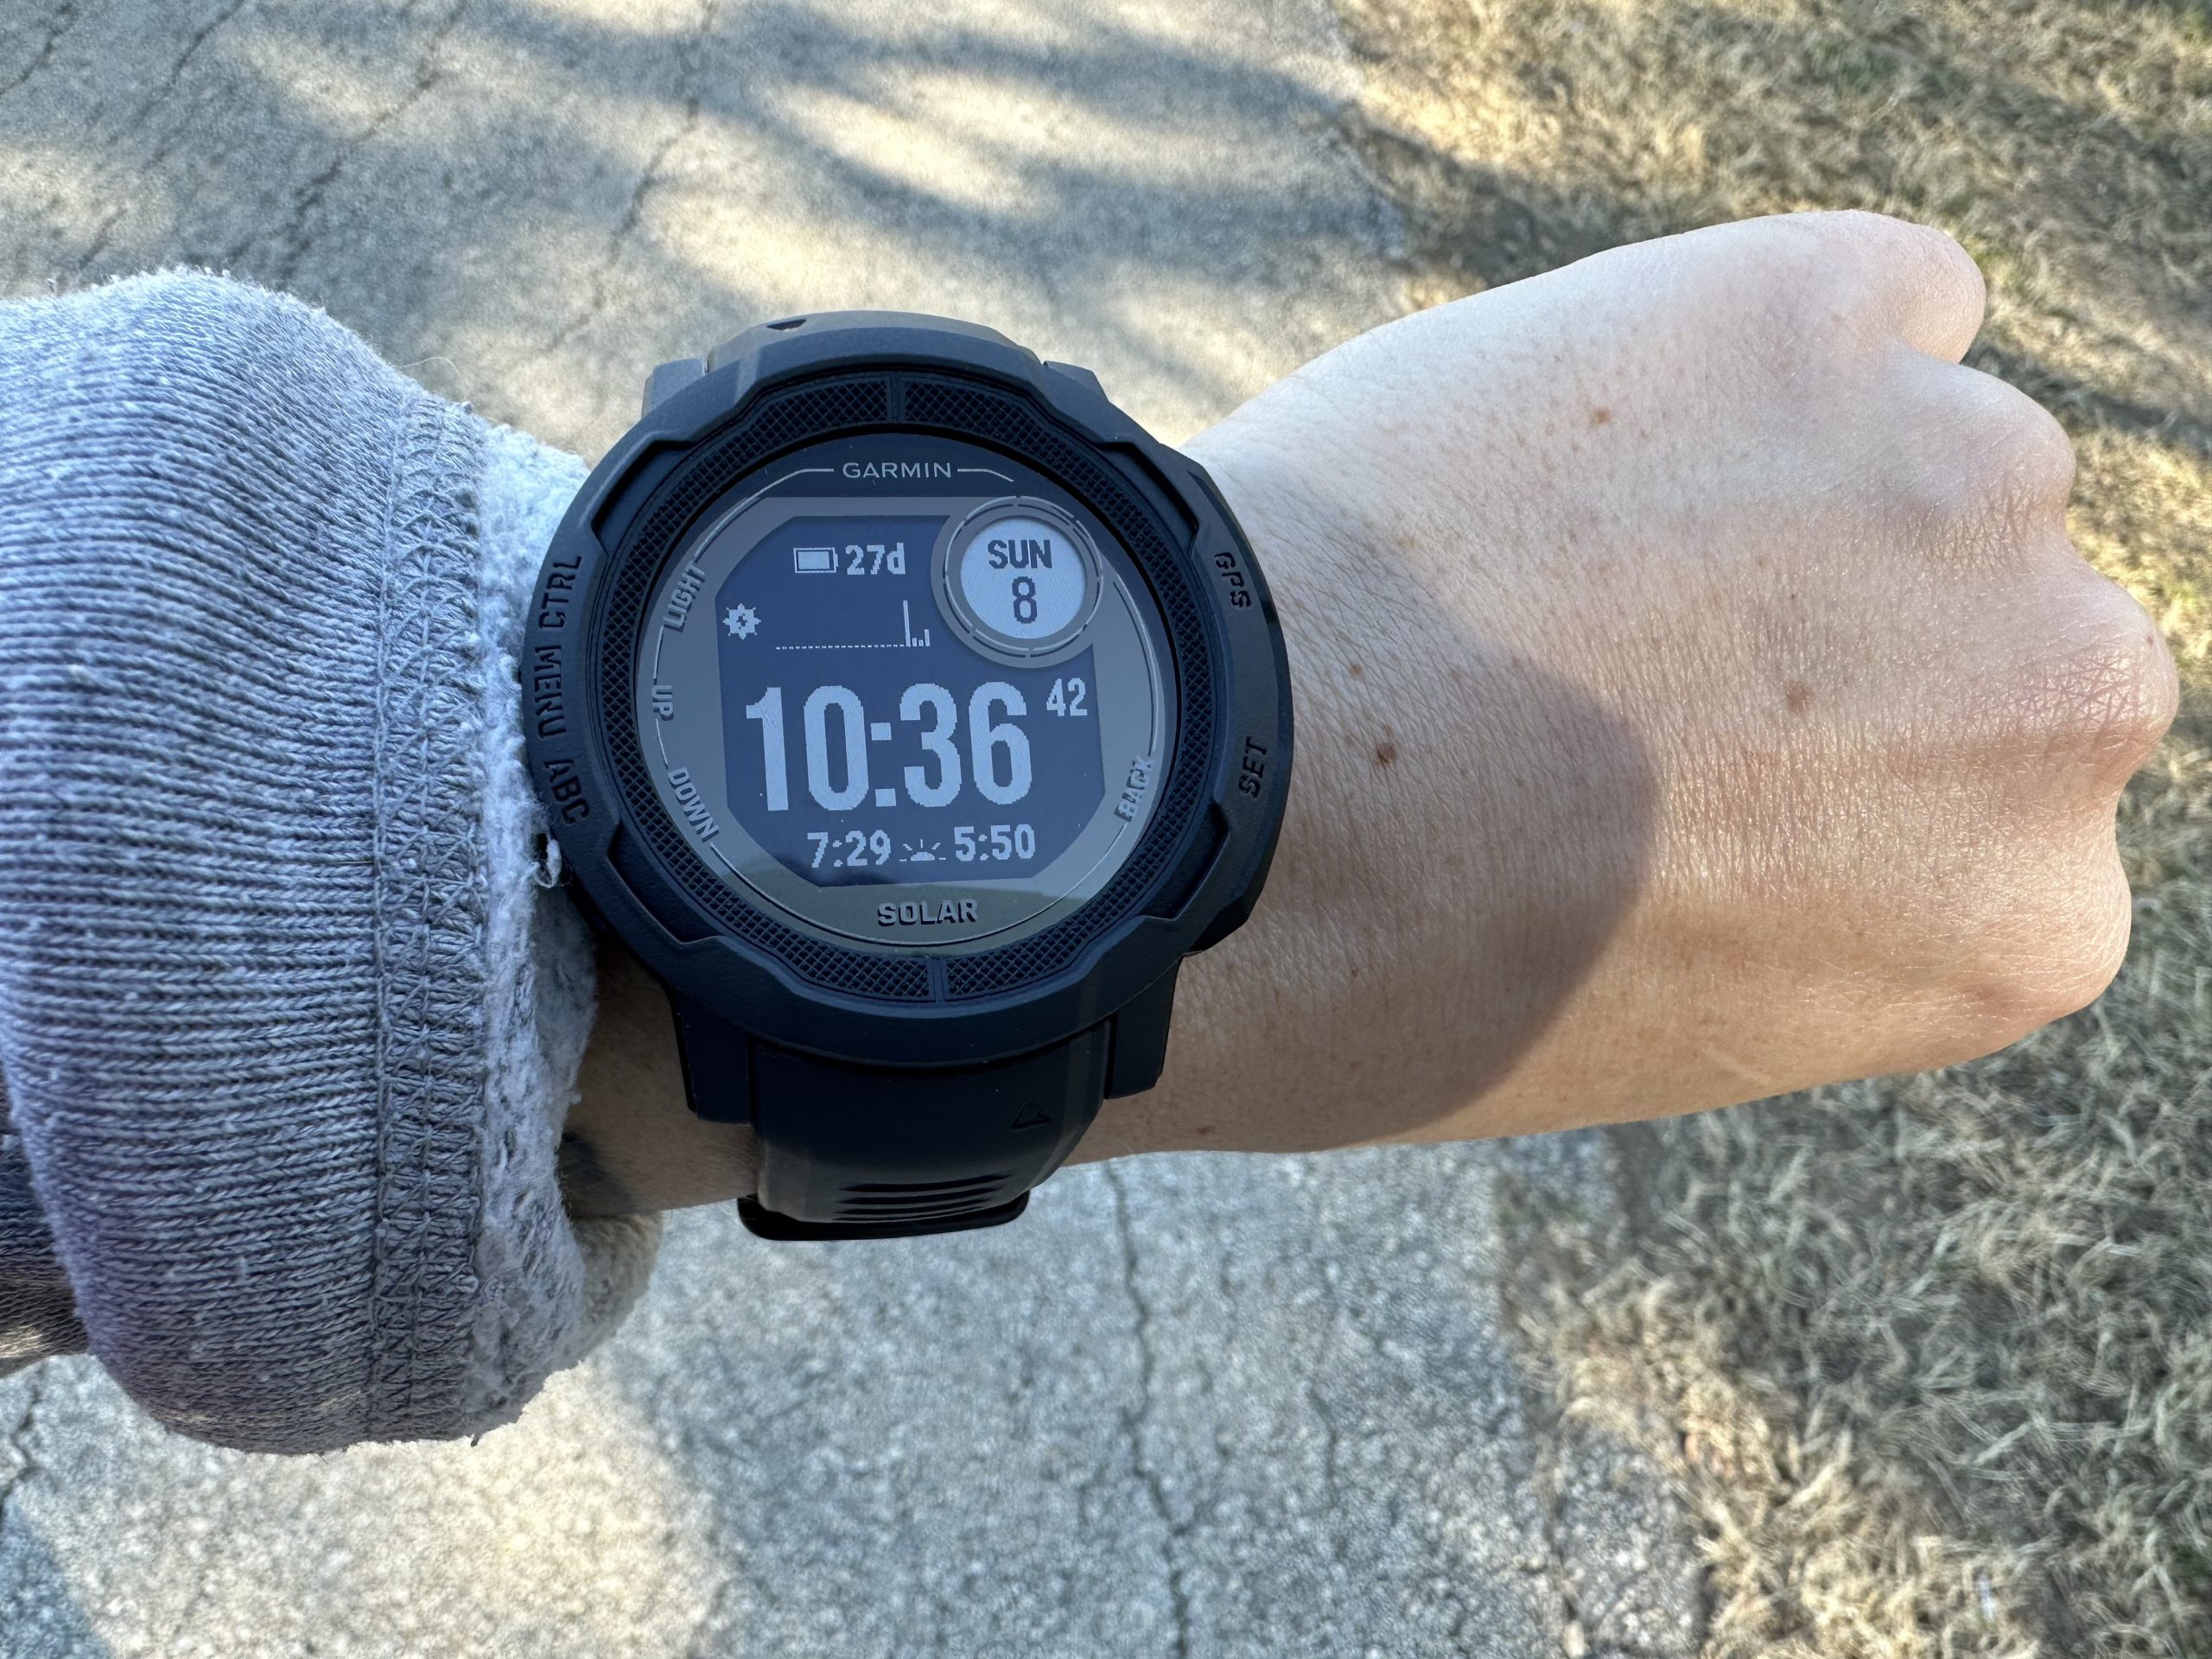 Garmin Instinct review: A smartwatch built for the great outdoors